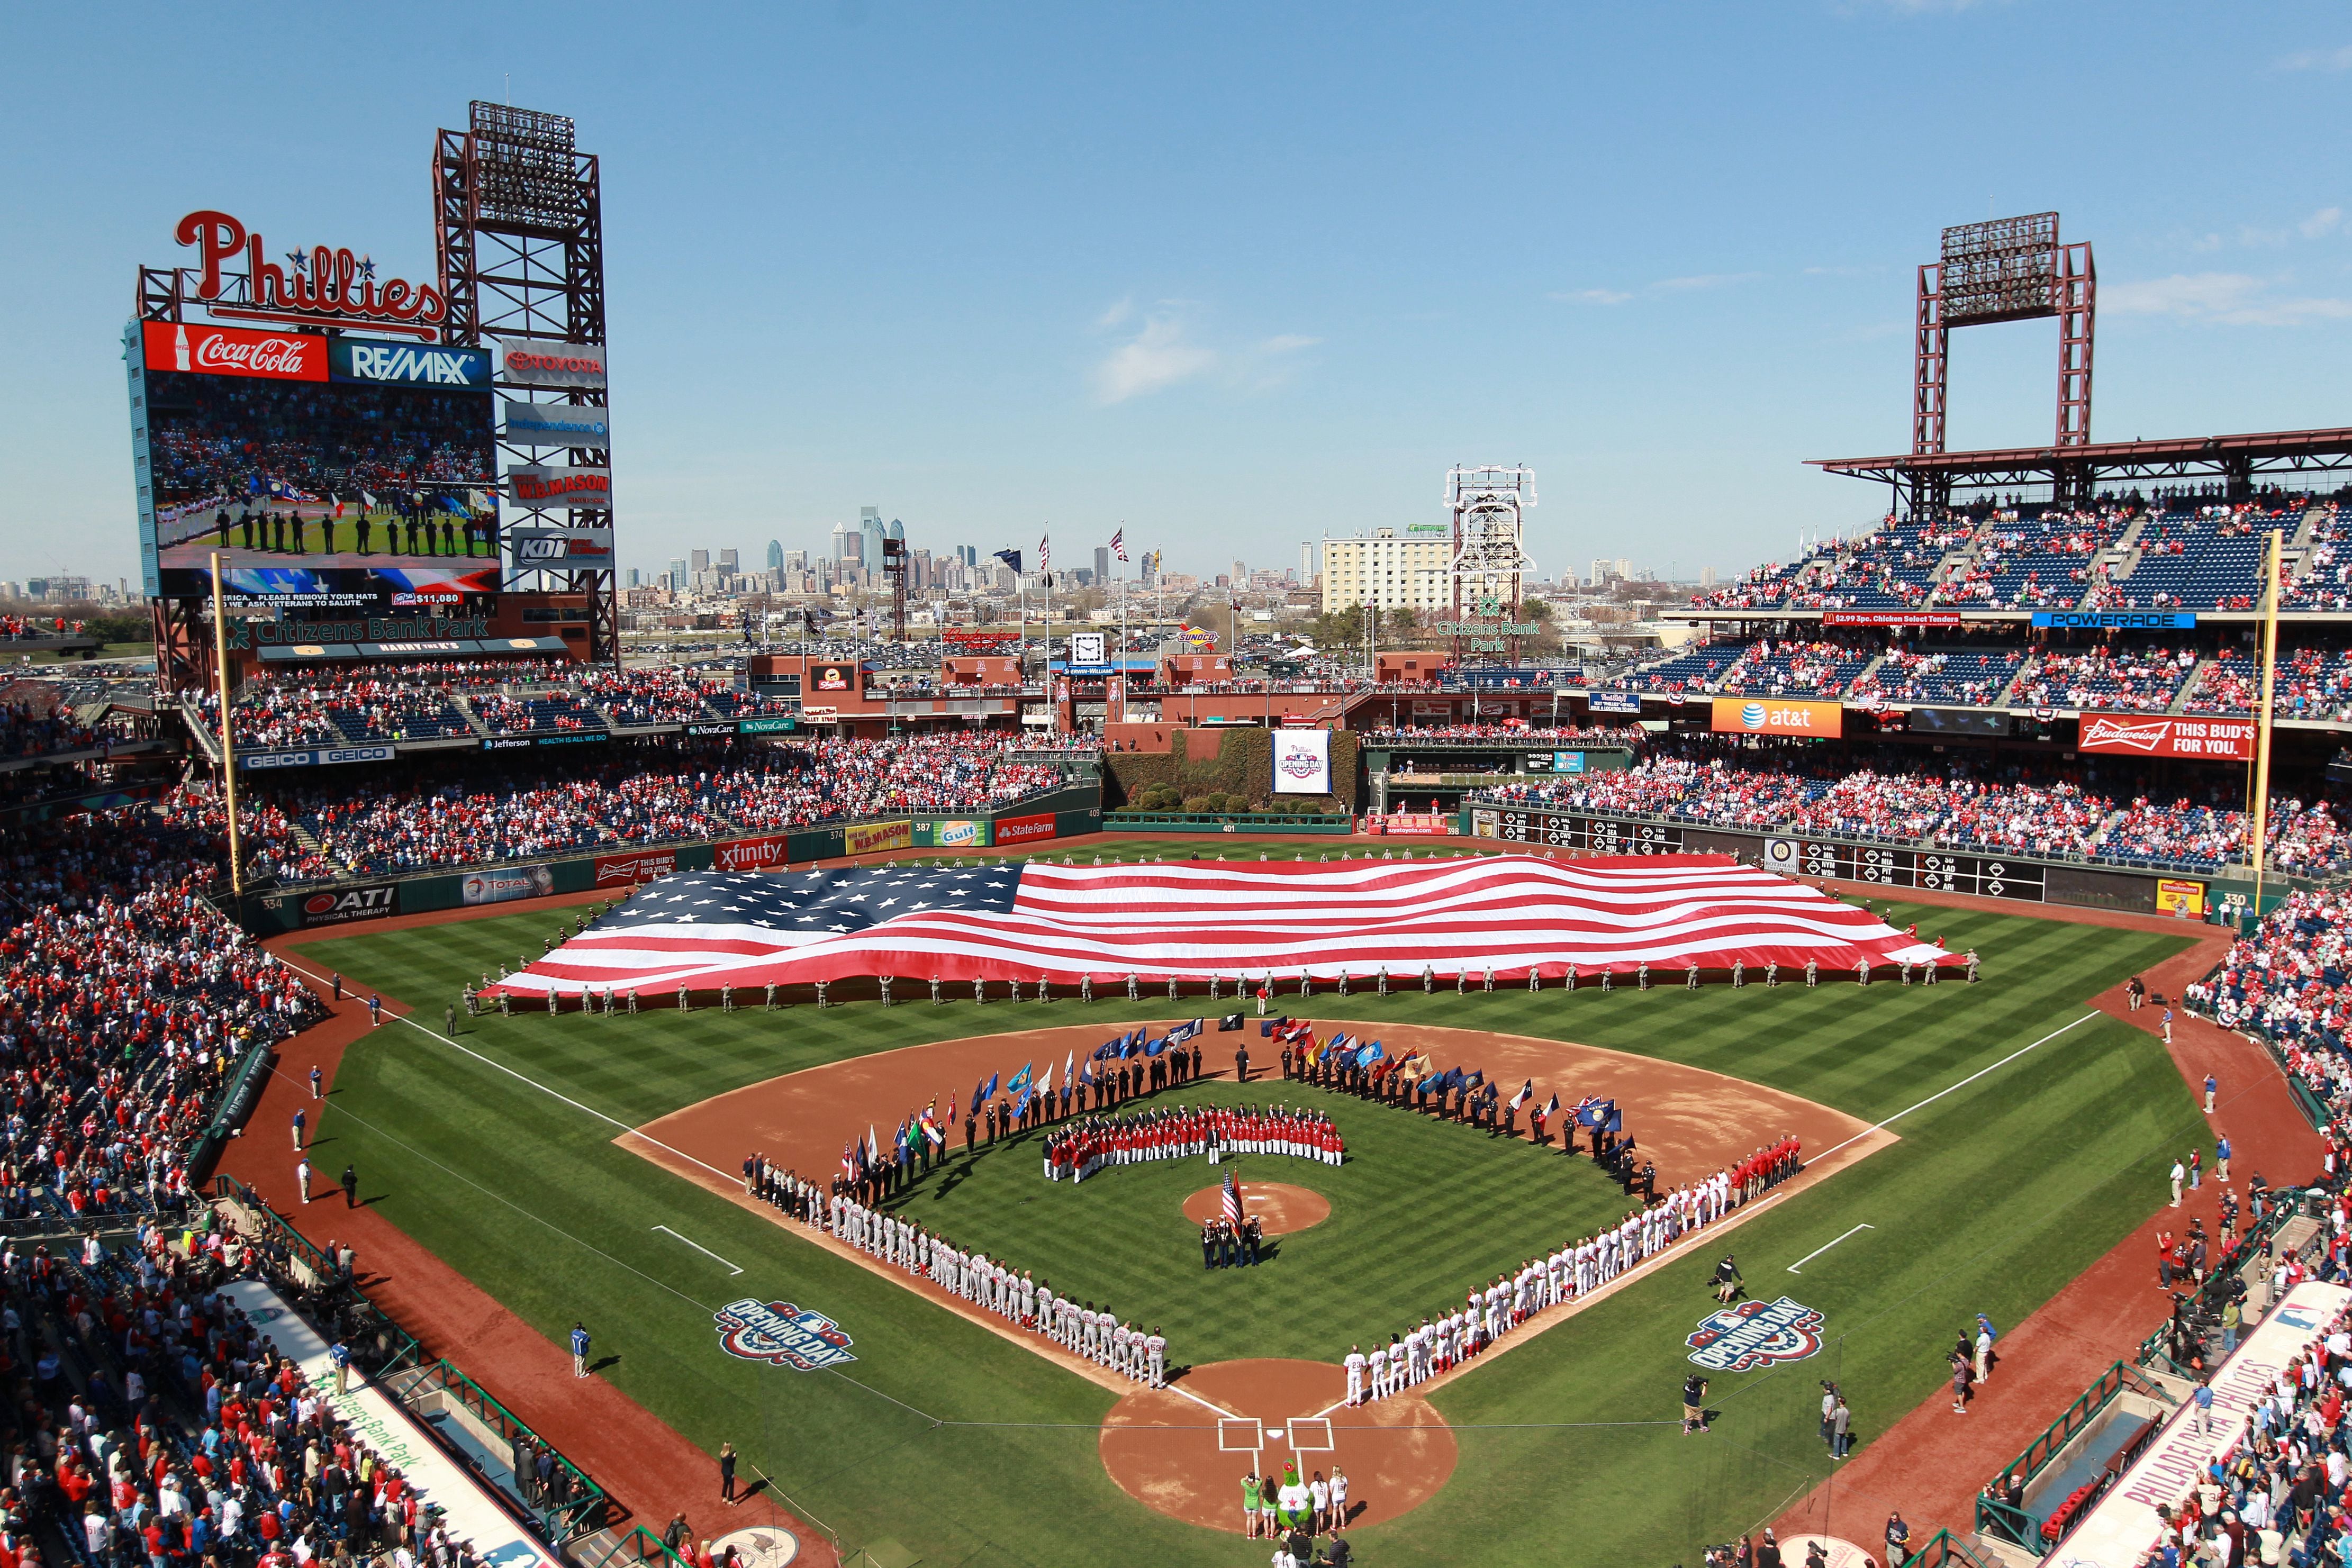 Baseball is back at Citizens Bank Park, but the new normal takes